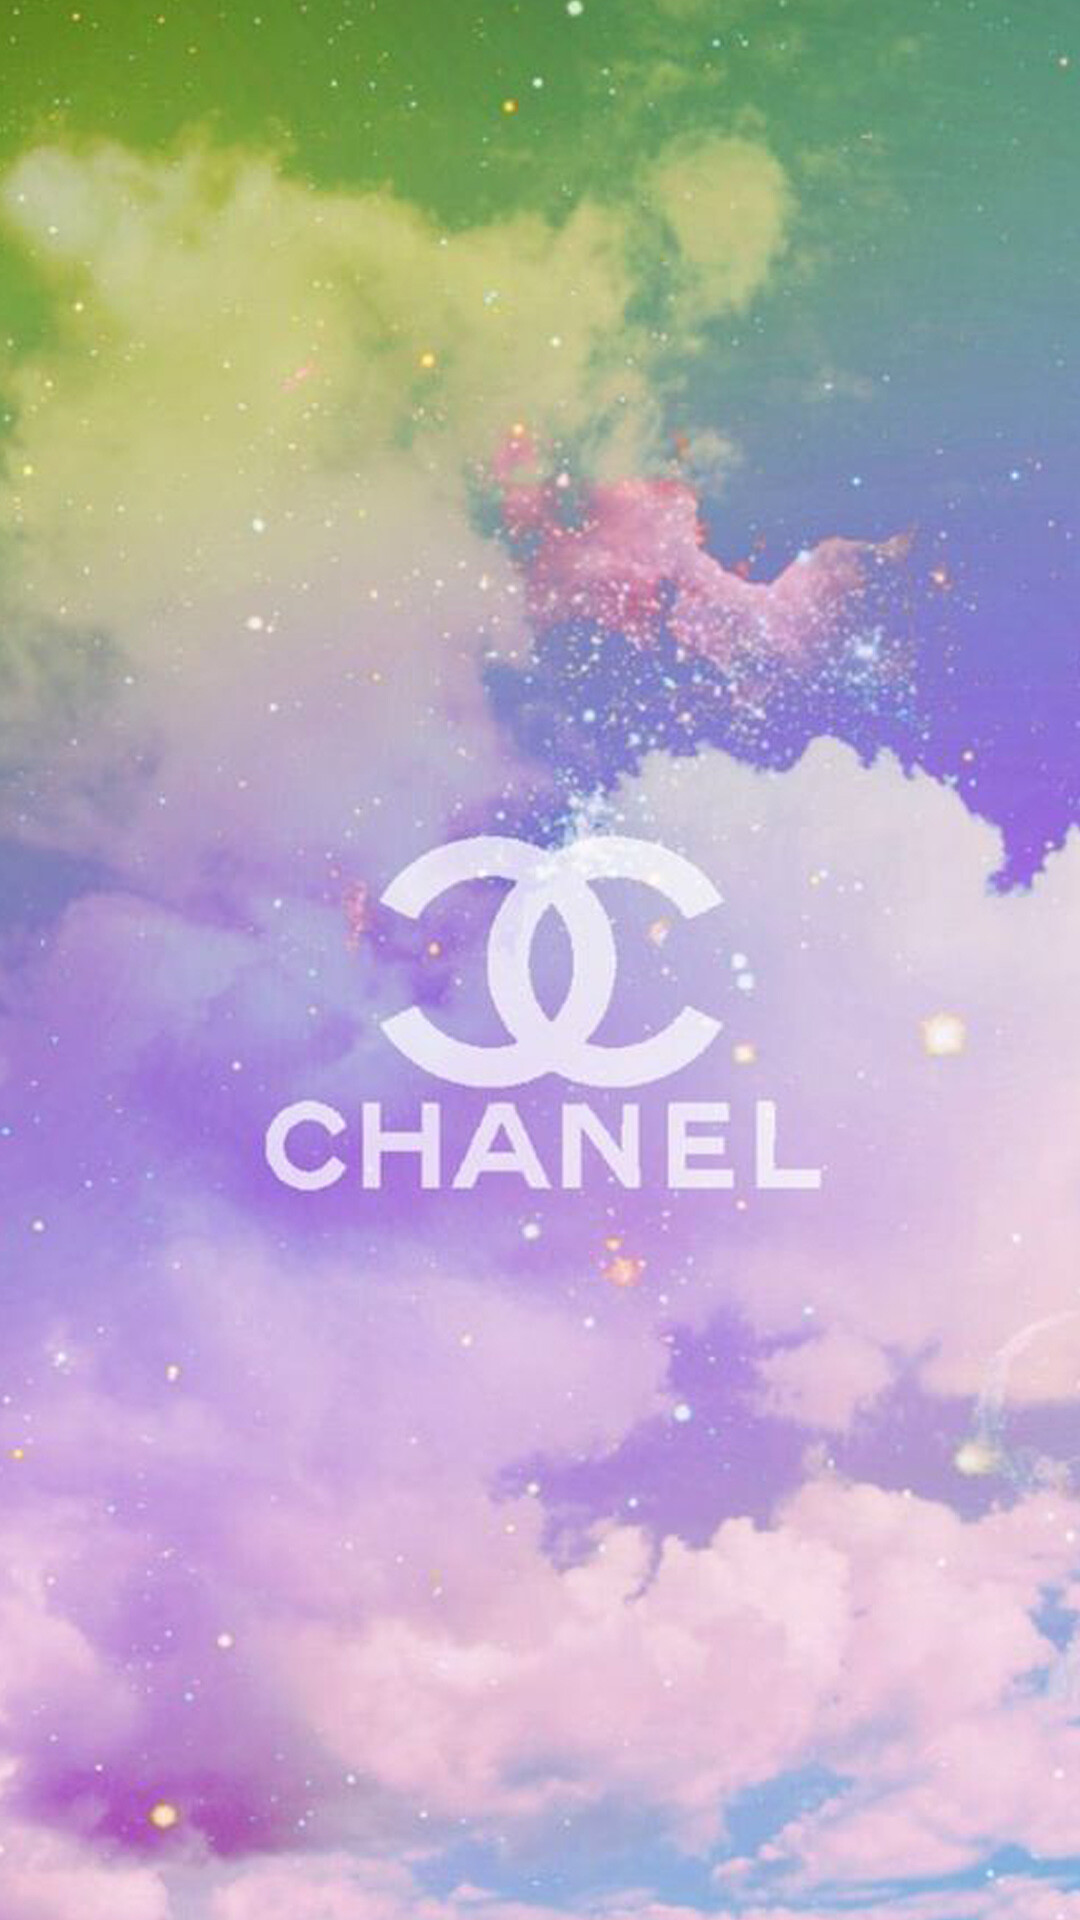 HD wallpaper, Phone 1080P Chanel Wallpaper Image, Premium Fashion, 1080X1920 Full Hd Phone, Chanel Wallpaper Collection, High Quality Images, Elegant Style